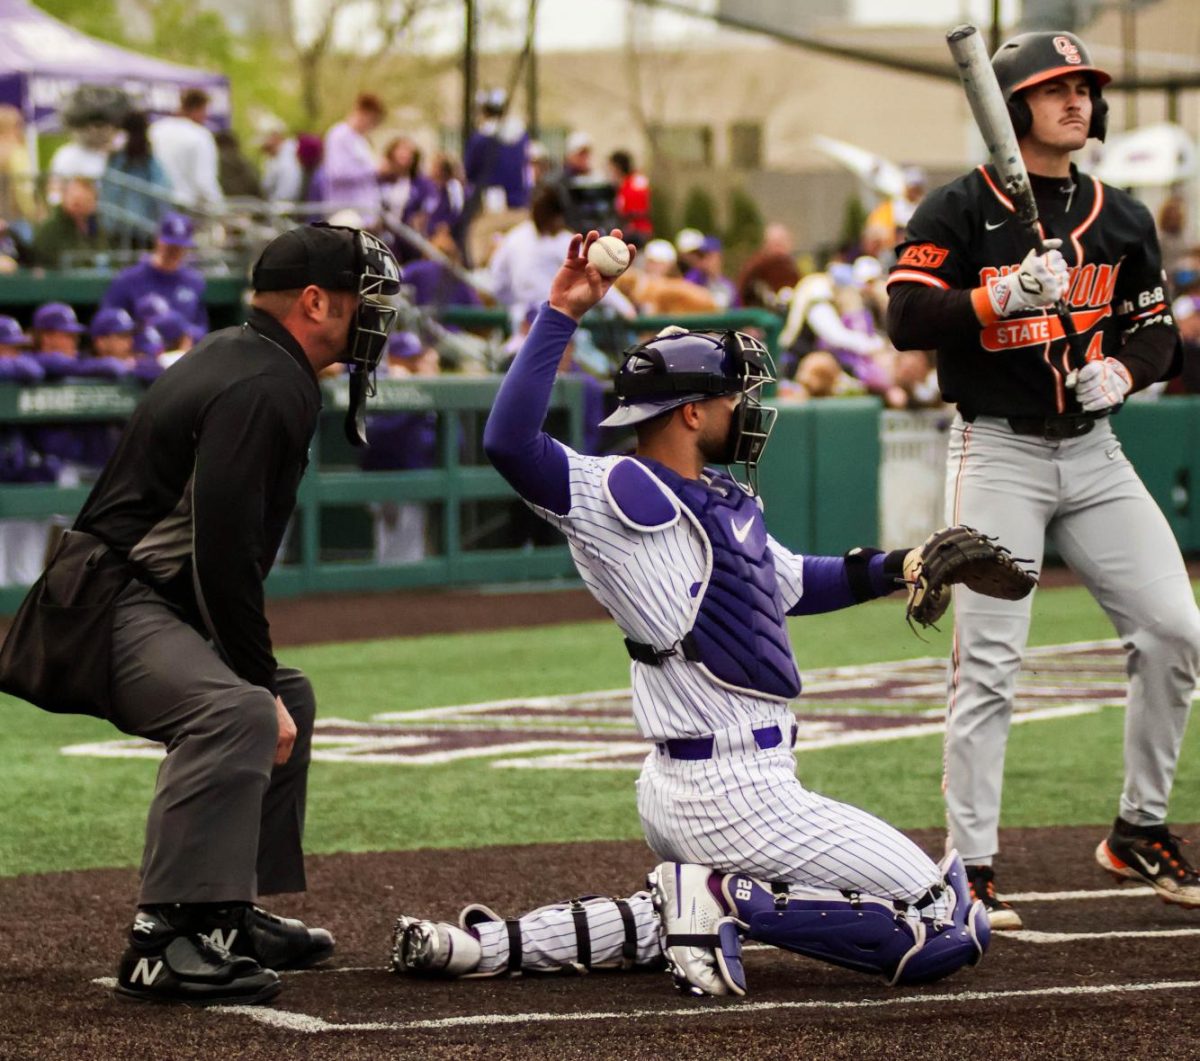 Catcher Raphael Pelletier throws the ball back against Oklahoma State. K-State won the series 2-1, the last series win the Wildcats have gained before playing Kansas.